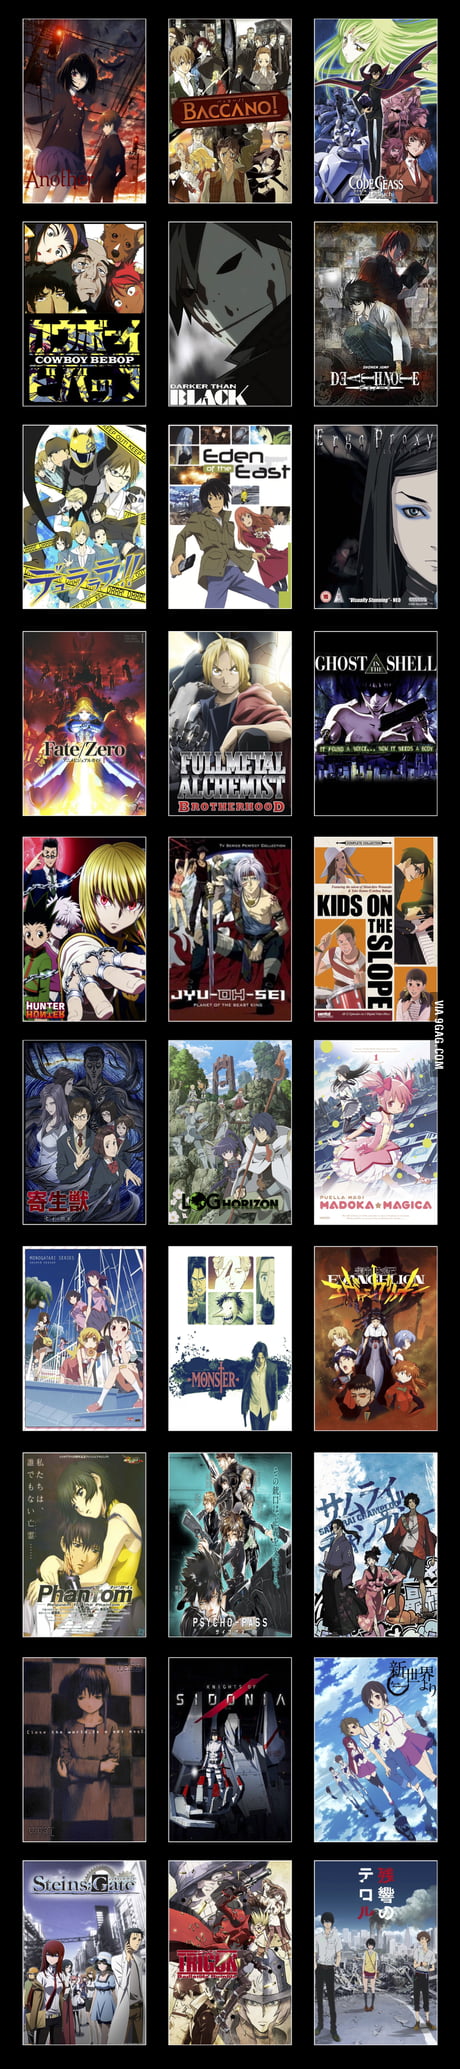 My personal list of anime you should watch. - 9GAG